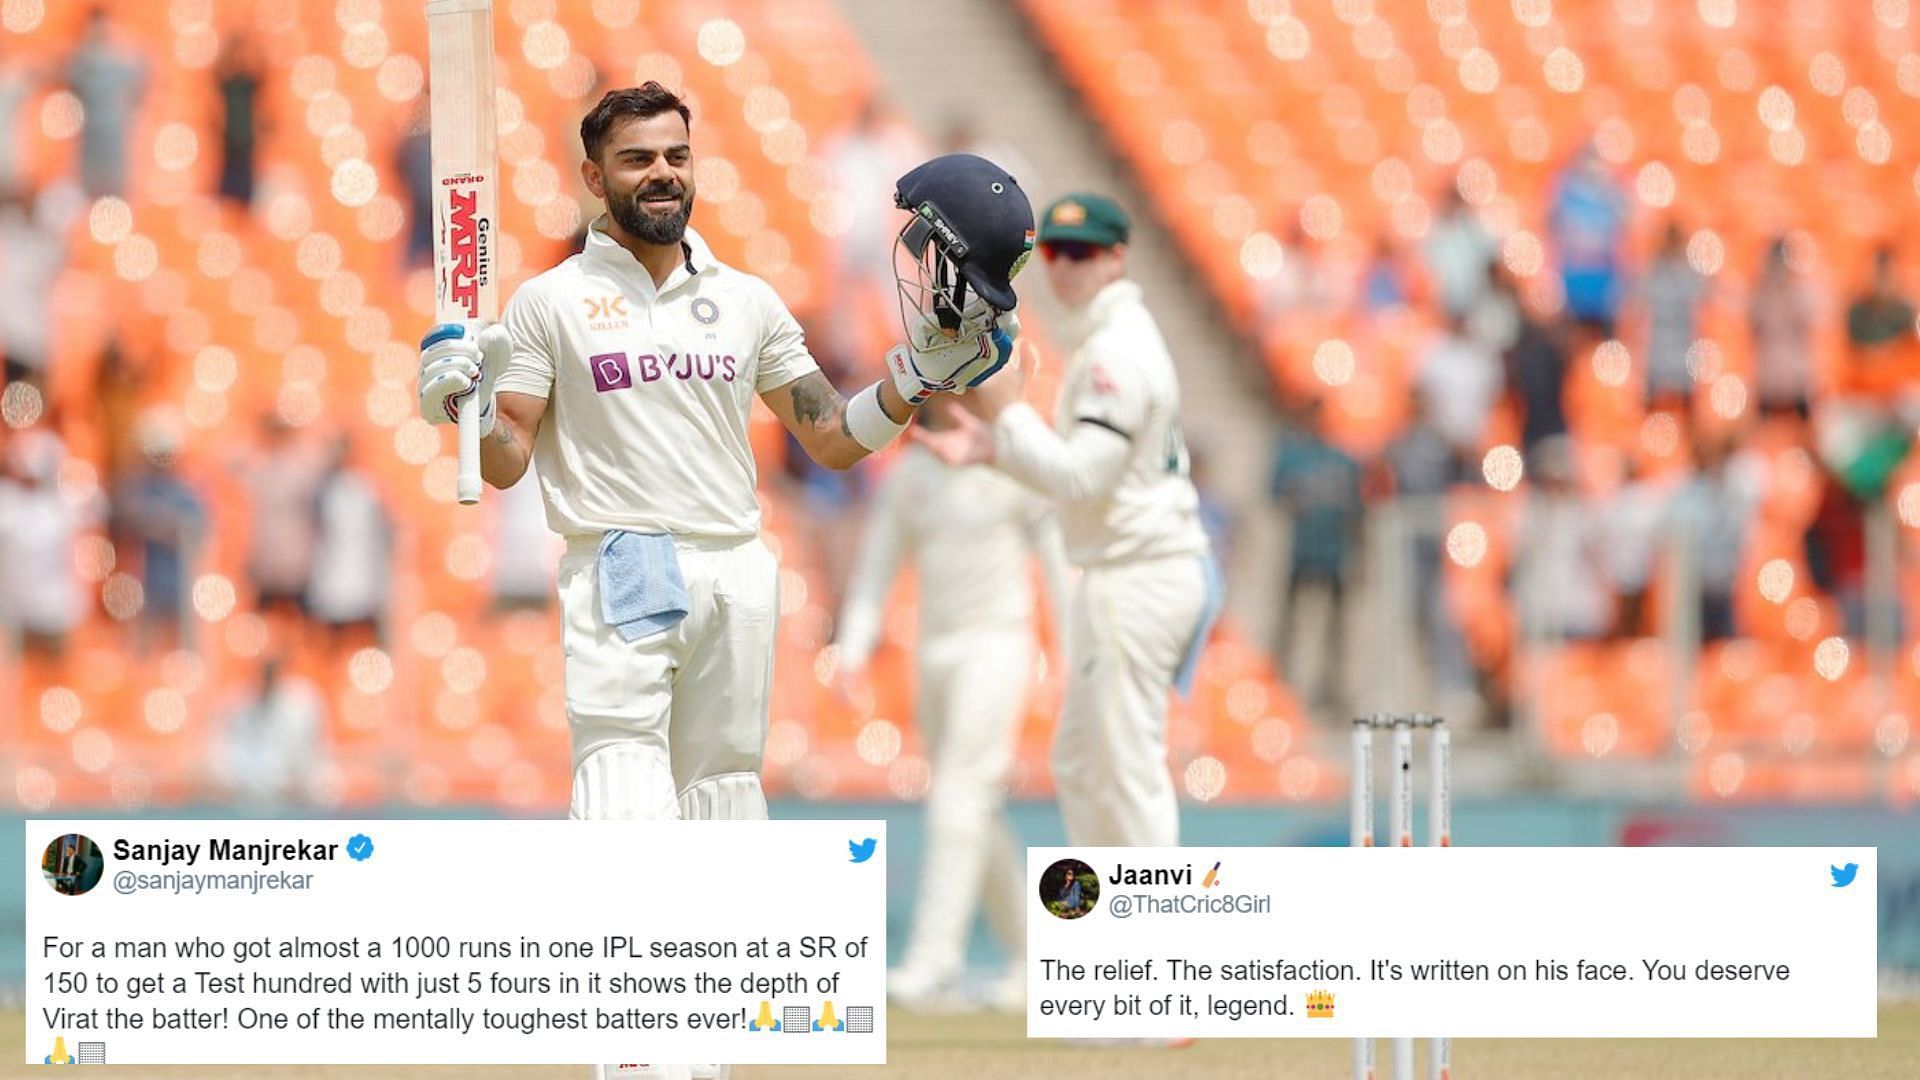 Fans hailed Virat Kohli for his patience and determination to get that elusive hundred (P.C.:Twitter)